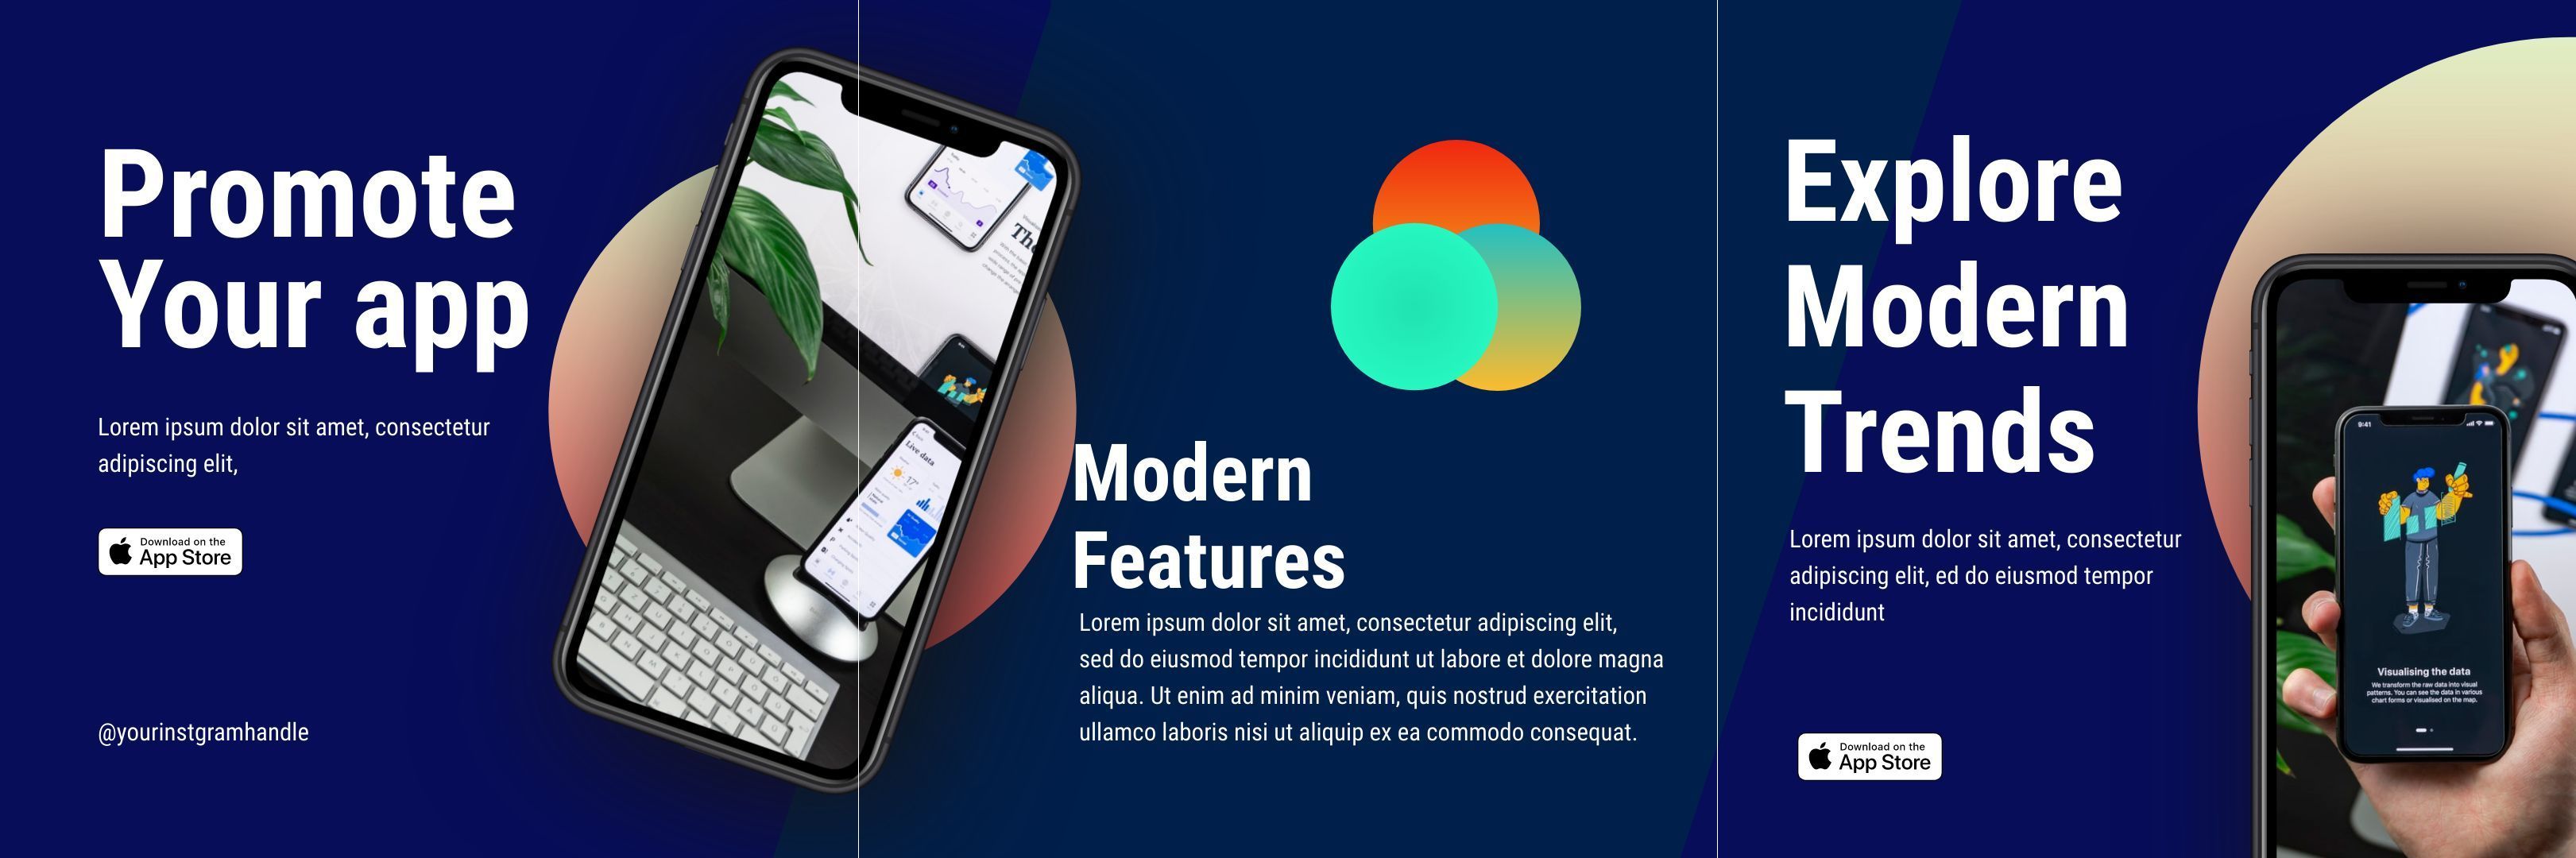 Instagram Panorama 6 template. Quickly edit fonts, text, colors, and more for free.